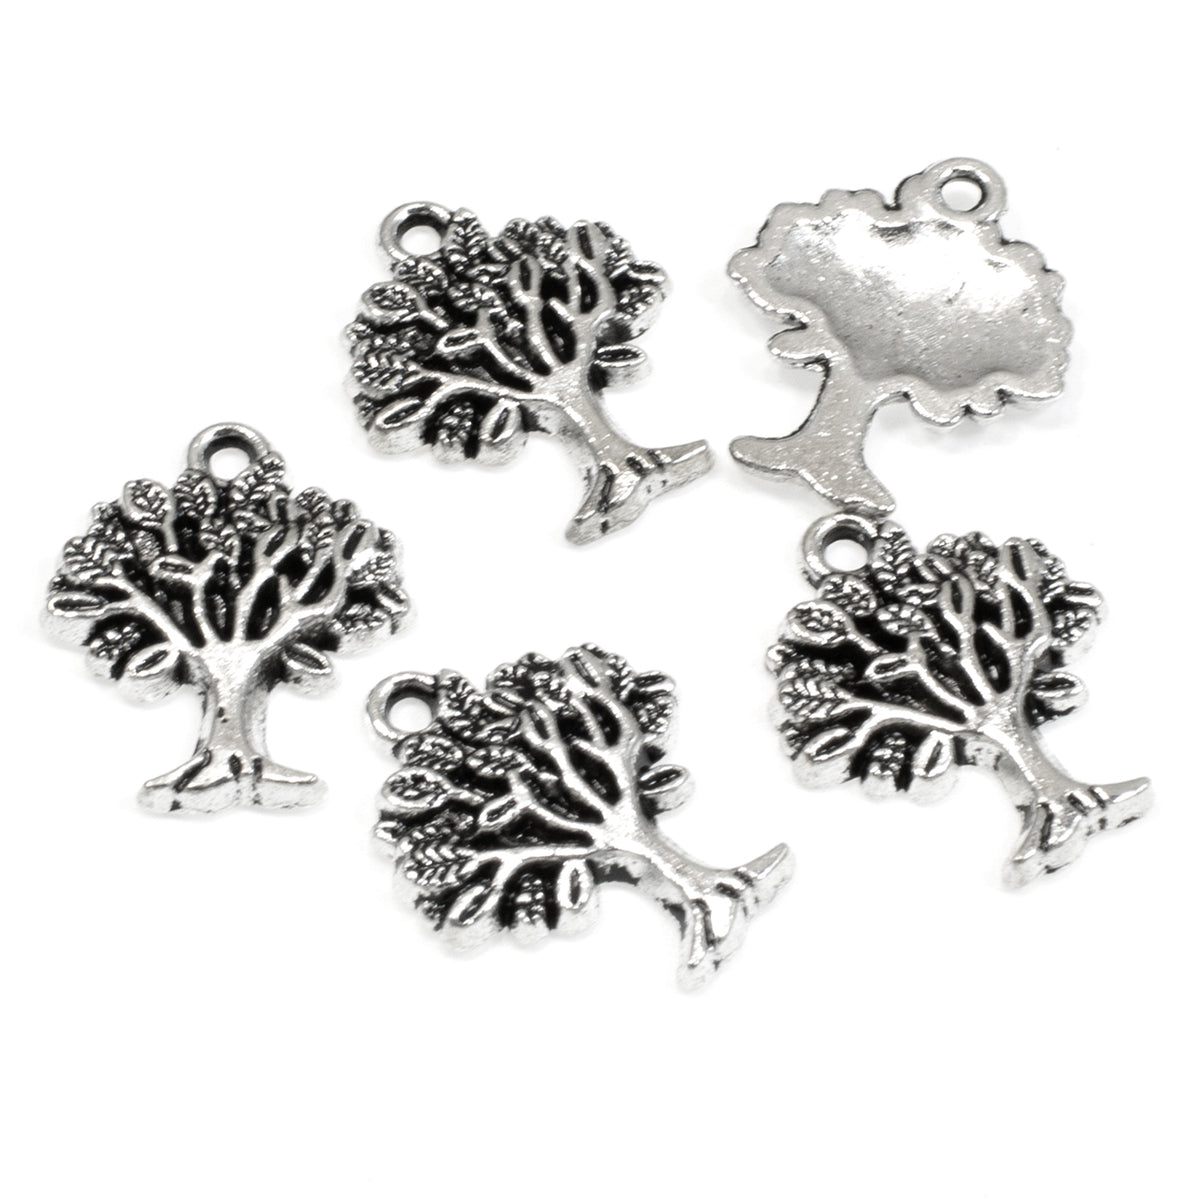 Pack of 50 Tree of Life Charms Jewelry Making Silver Color DIY